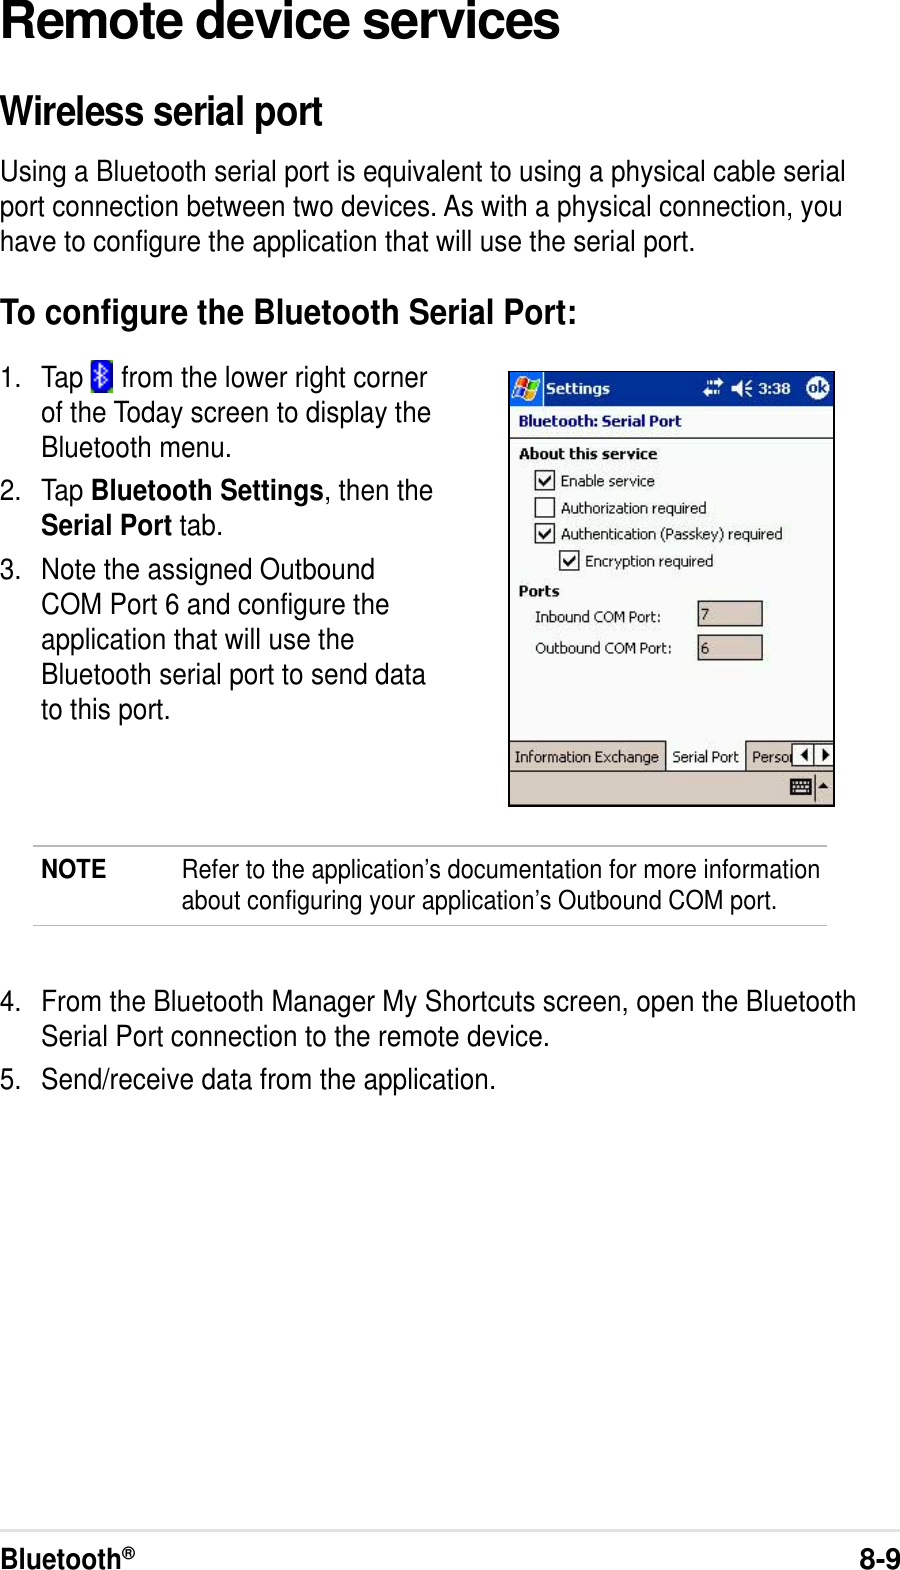 Bluetooth®8-9Remote device servicesWireless serial portUsing a Bluetooth serial port is equivalent to using a physical cable serialport connection between two devices. As with a physical connection, youhave to configure the application that will use the serial port.To configure the Bluetooth Serial Port:1. Tap   from the lower right cornerof the Today screen to display theBluetooth menu.2. Tap Bluetooth Settings, then theSerial Port tab.3. Note the assigned OutboundCOM Port 6 and configure theapplication that will use theBluetooth serial port to send datato this port.NOTE Refer to the application’s documentation for more informationabout configuring your application’s Outbound COM port.4. From the Bluetooth Manager My Shortcuts screen, open the BluetoothSerial Port connection to the remote device.5. Send/receive data from the application.